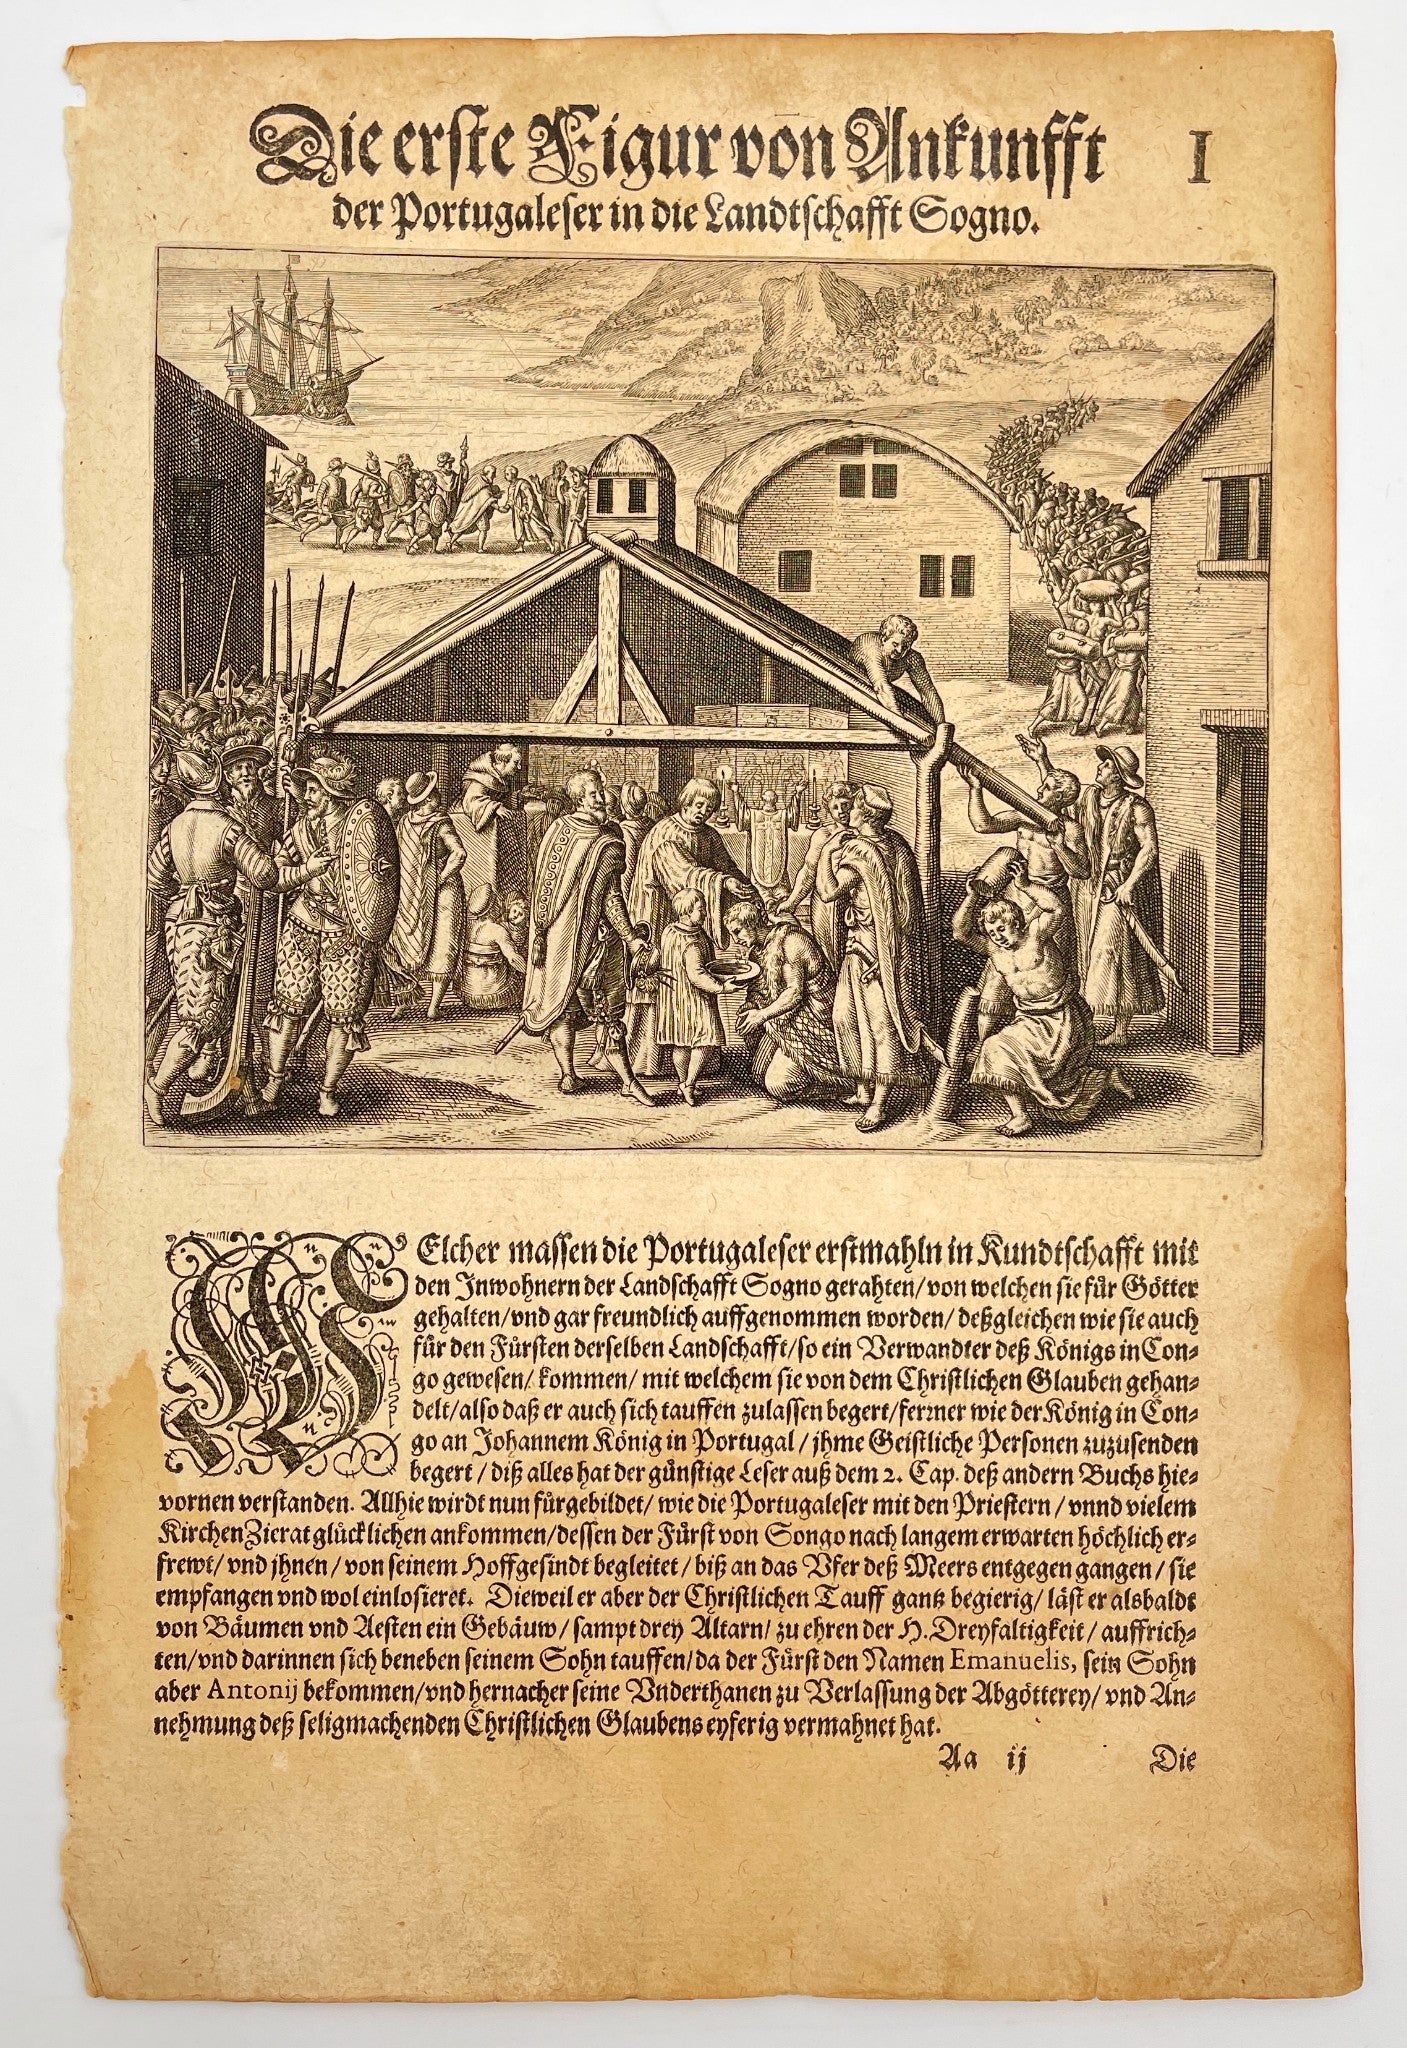 Antique Print - Theodor de Bry - "Conversion of the King of the Congo" - Germany - Dahlströms Fine Art